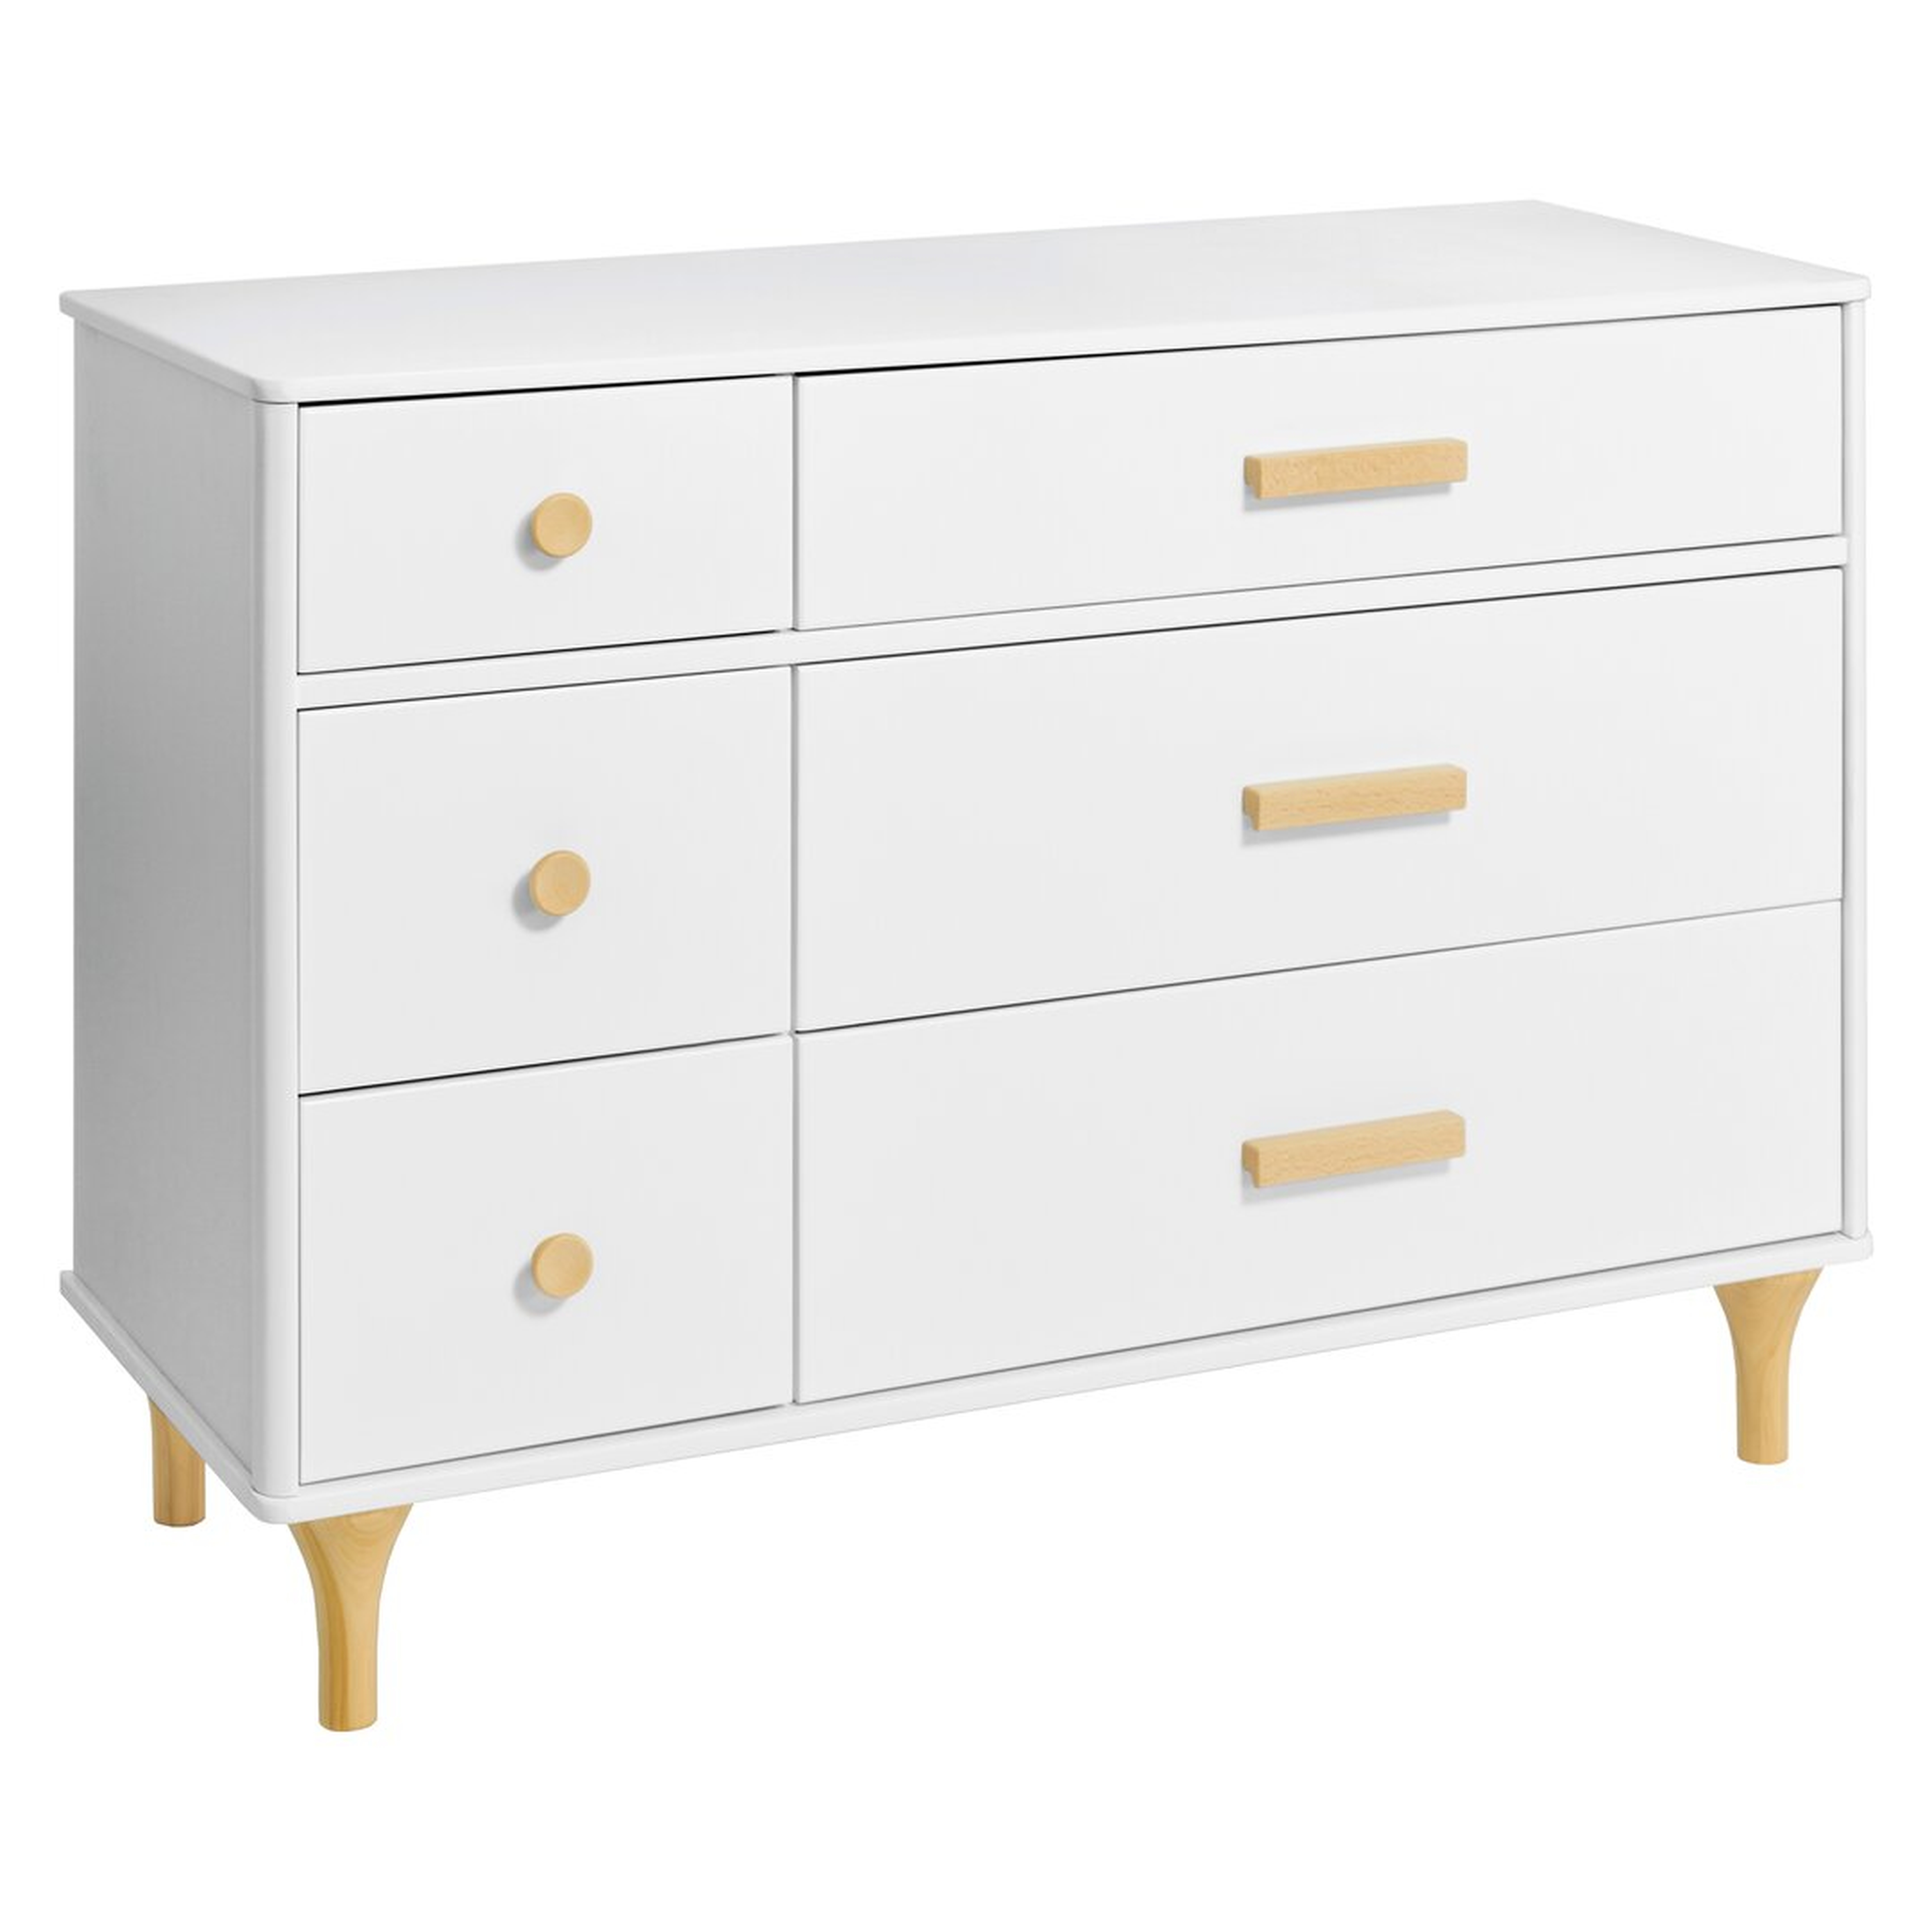 "babyletto Lolly 6 Drawer Double Dresser" - Perigold